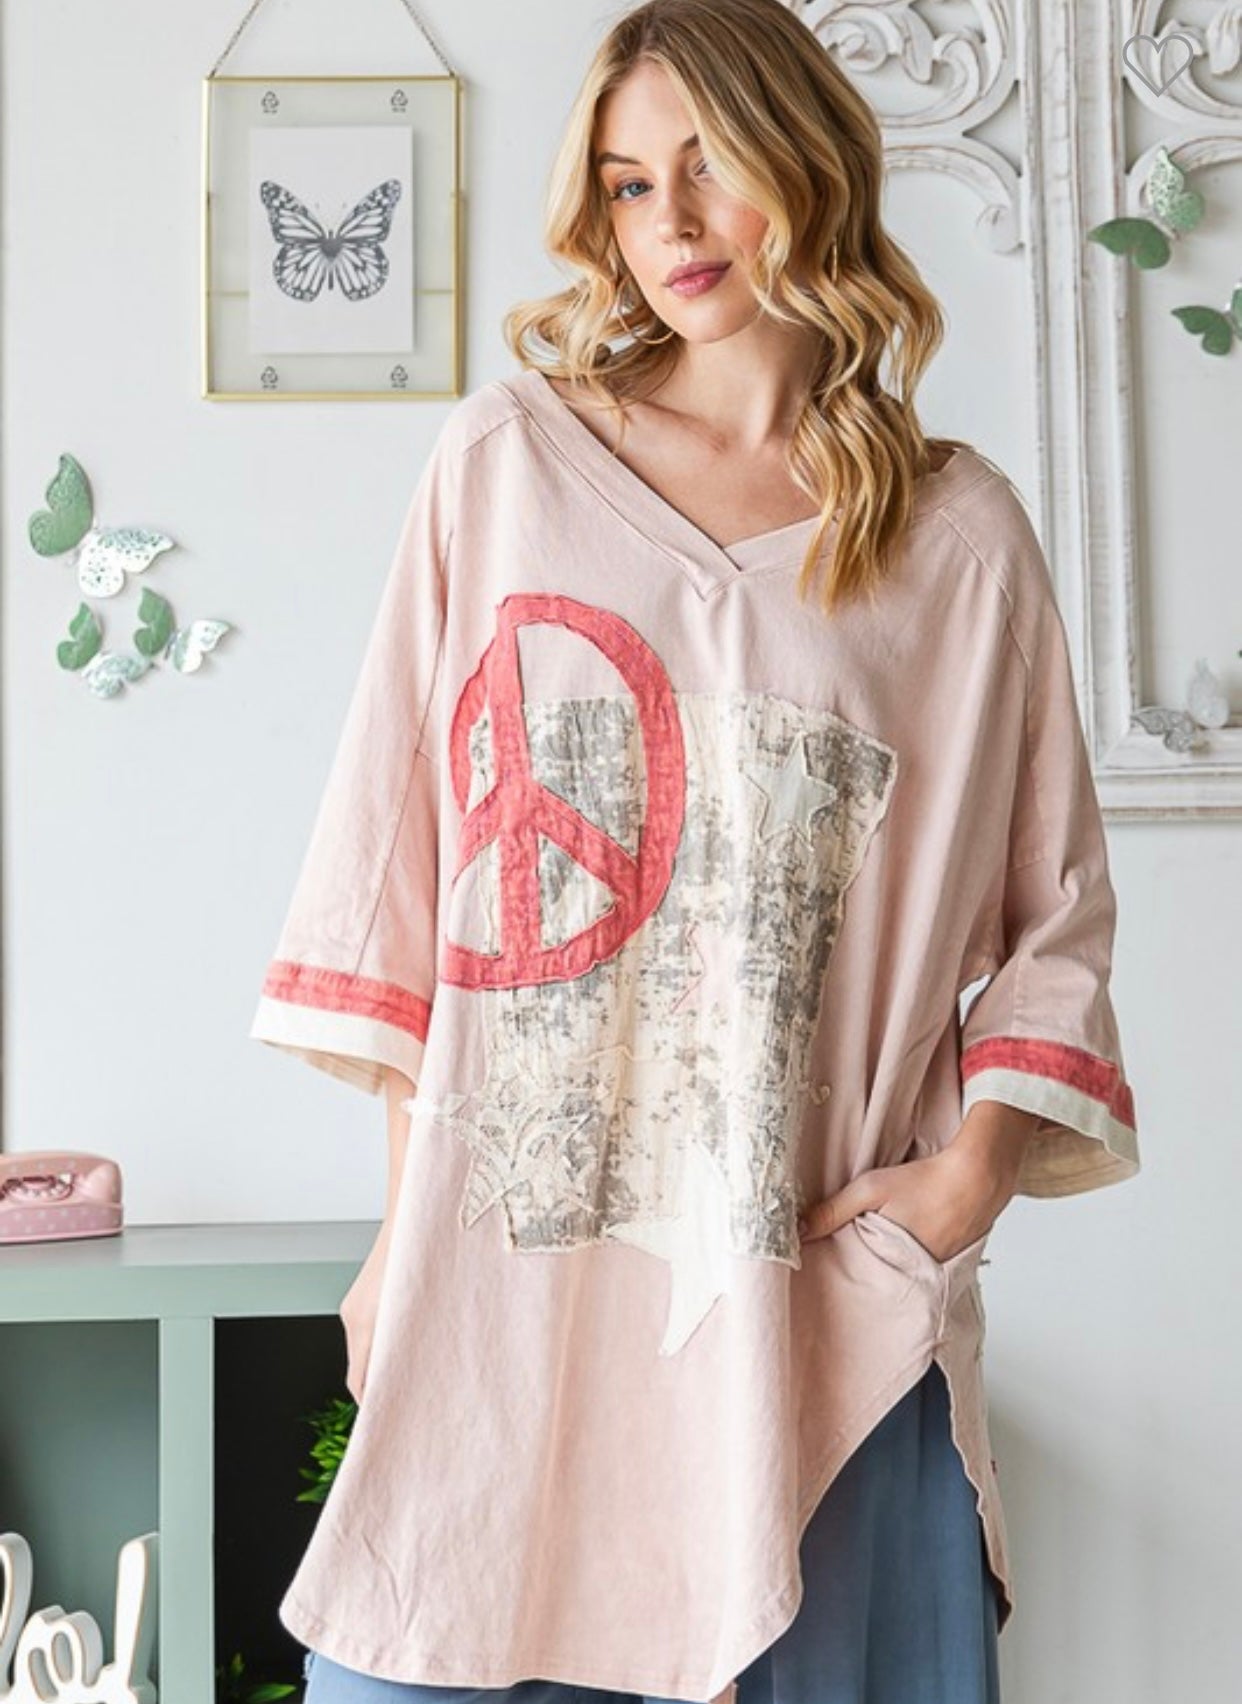 Oli and Hali Washed peace and star oversized top